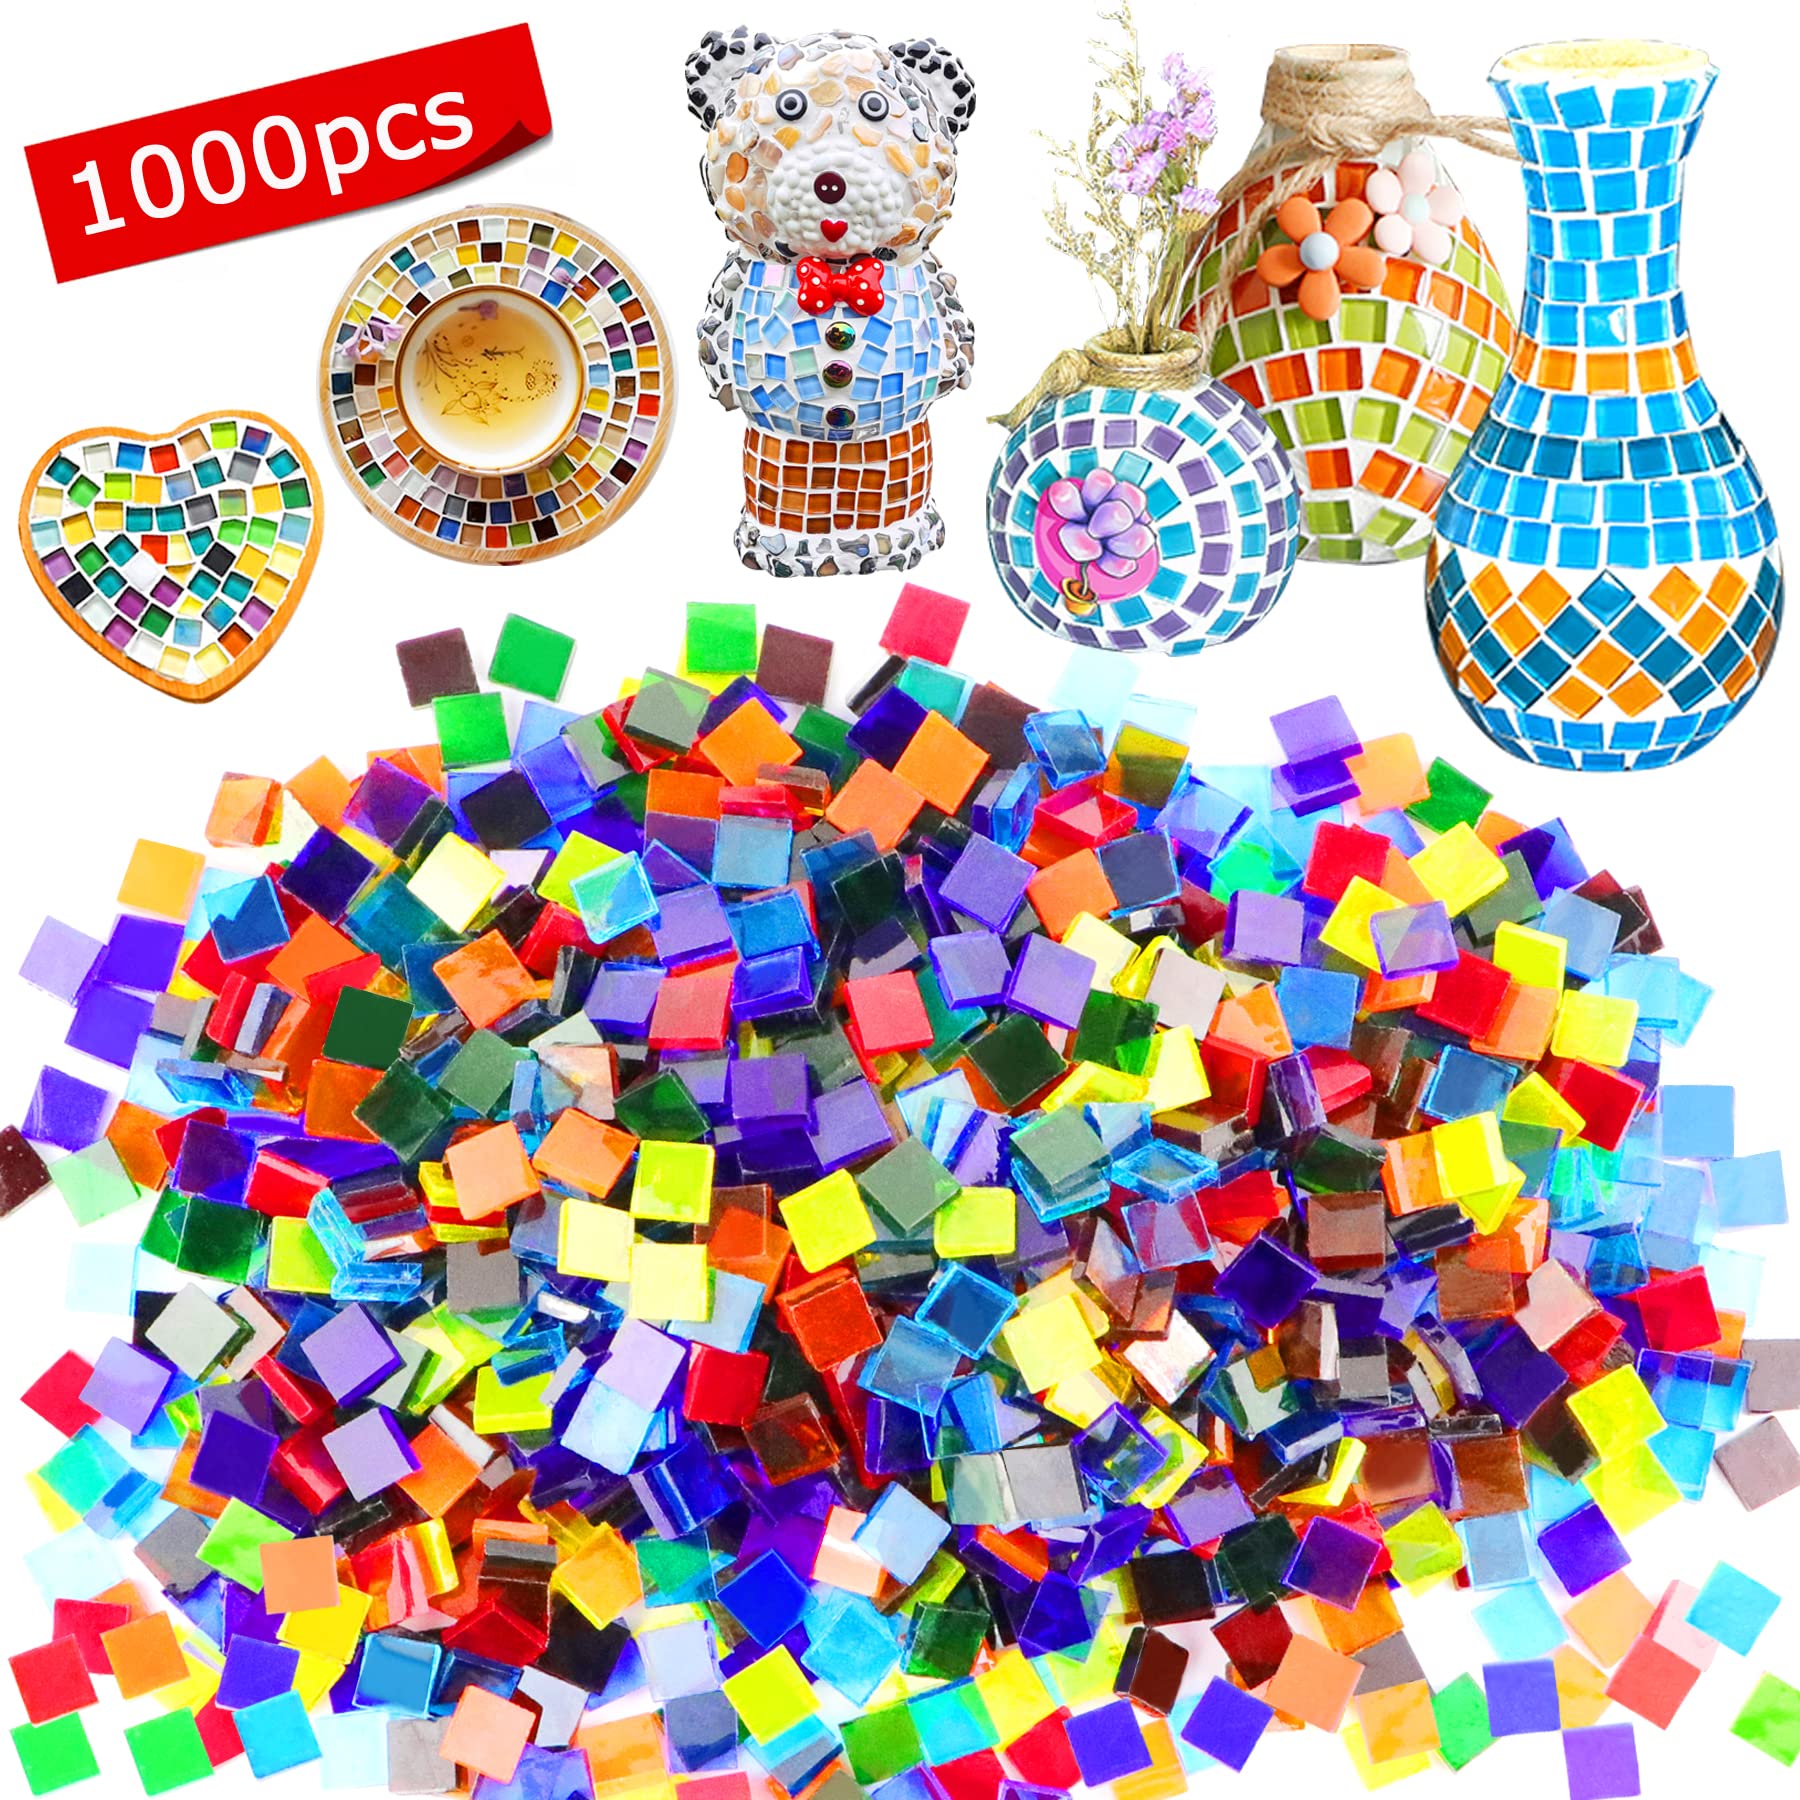 Csdtylh 1000 Pcs Mosaic Tiles, Glass Mosaic Tiles For Crafts Bulk, Stained Mosaic  Glass Pieces, Mosaic Supplies For Home Decorat